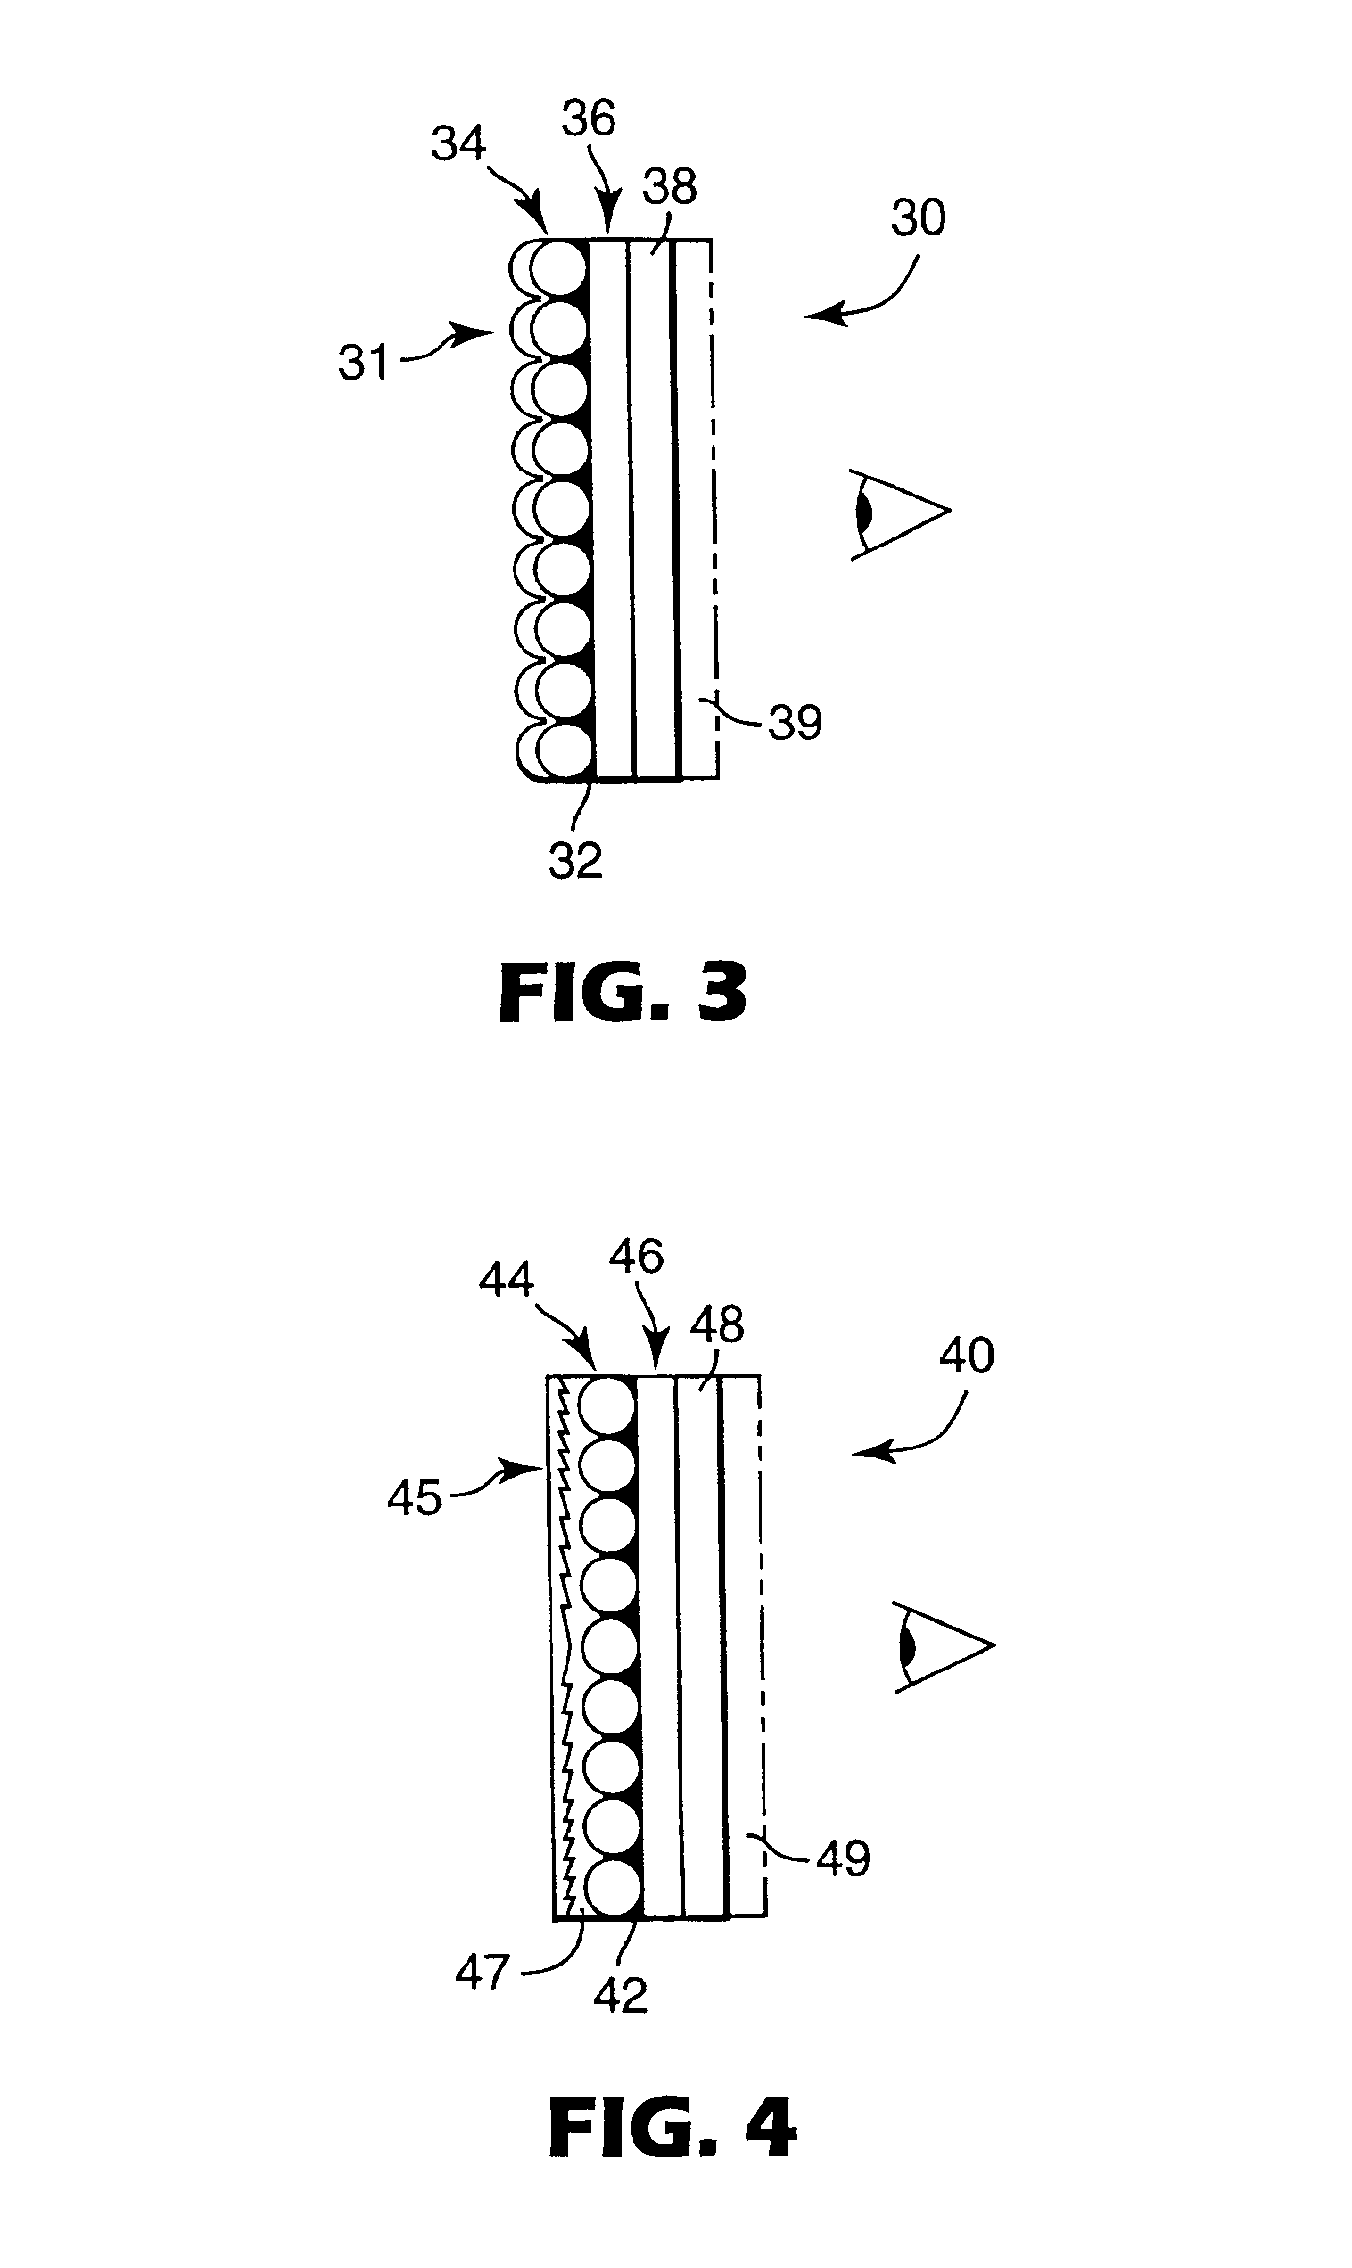 Screens and methods for displaying information